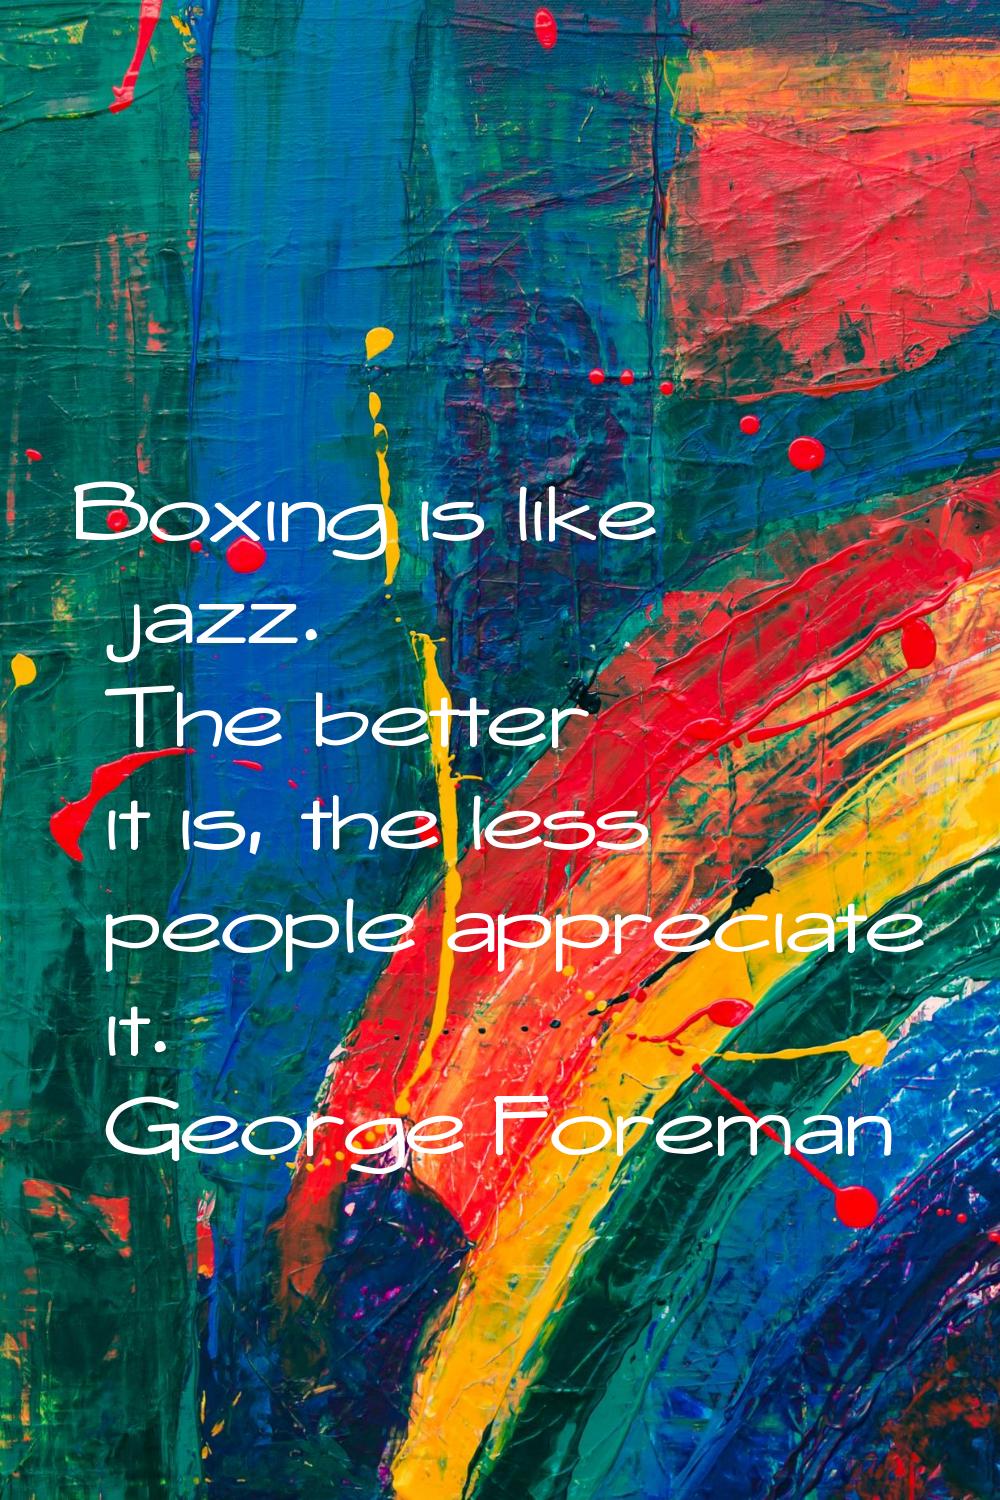 Boxing is like jazz. The better it is, the less people appreciate it.